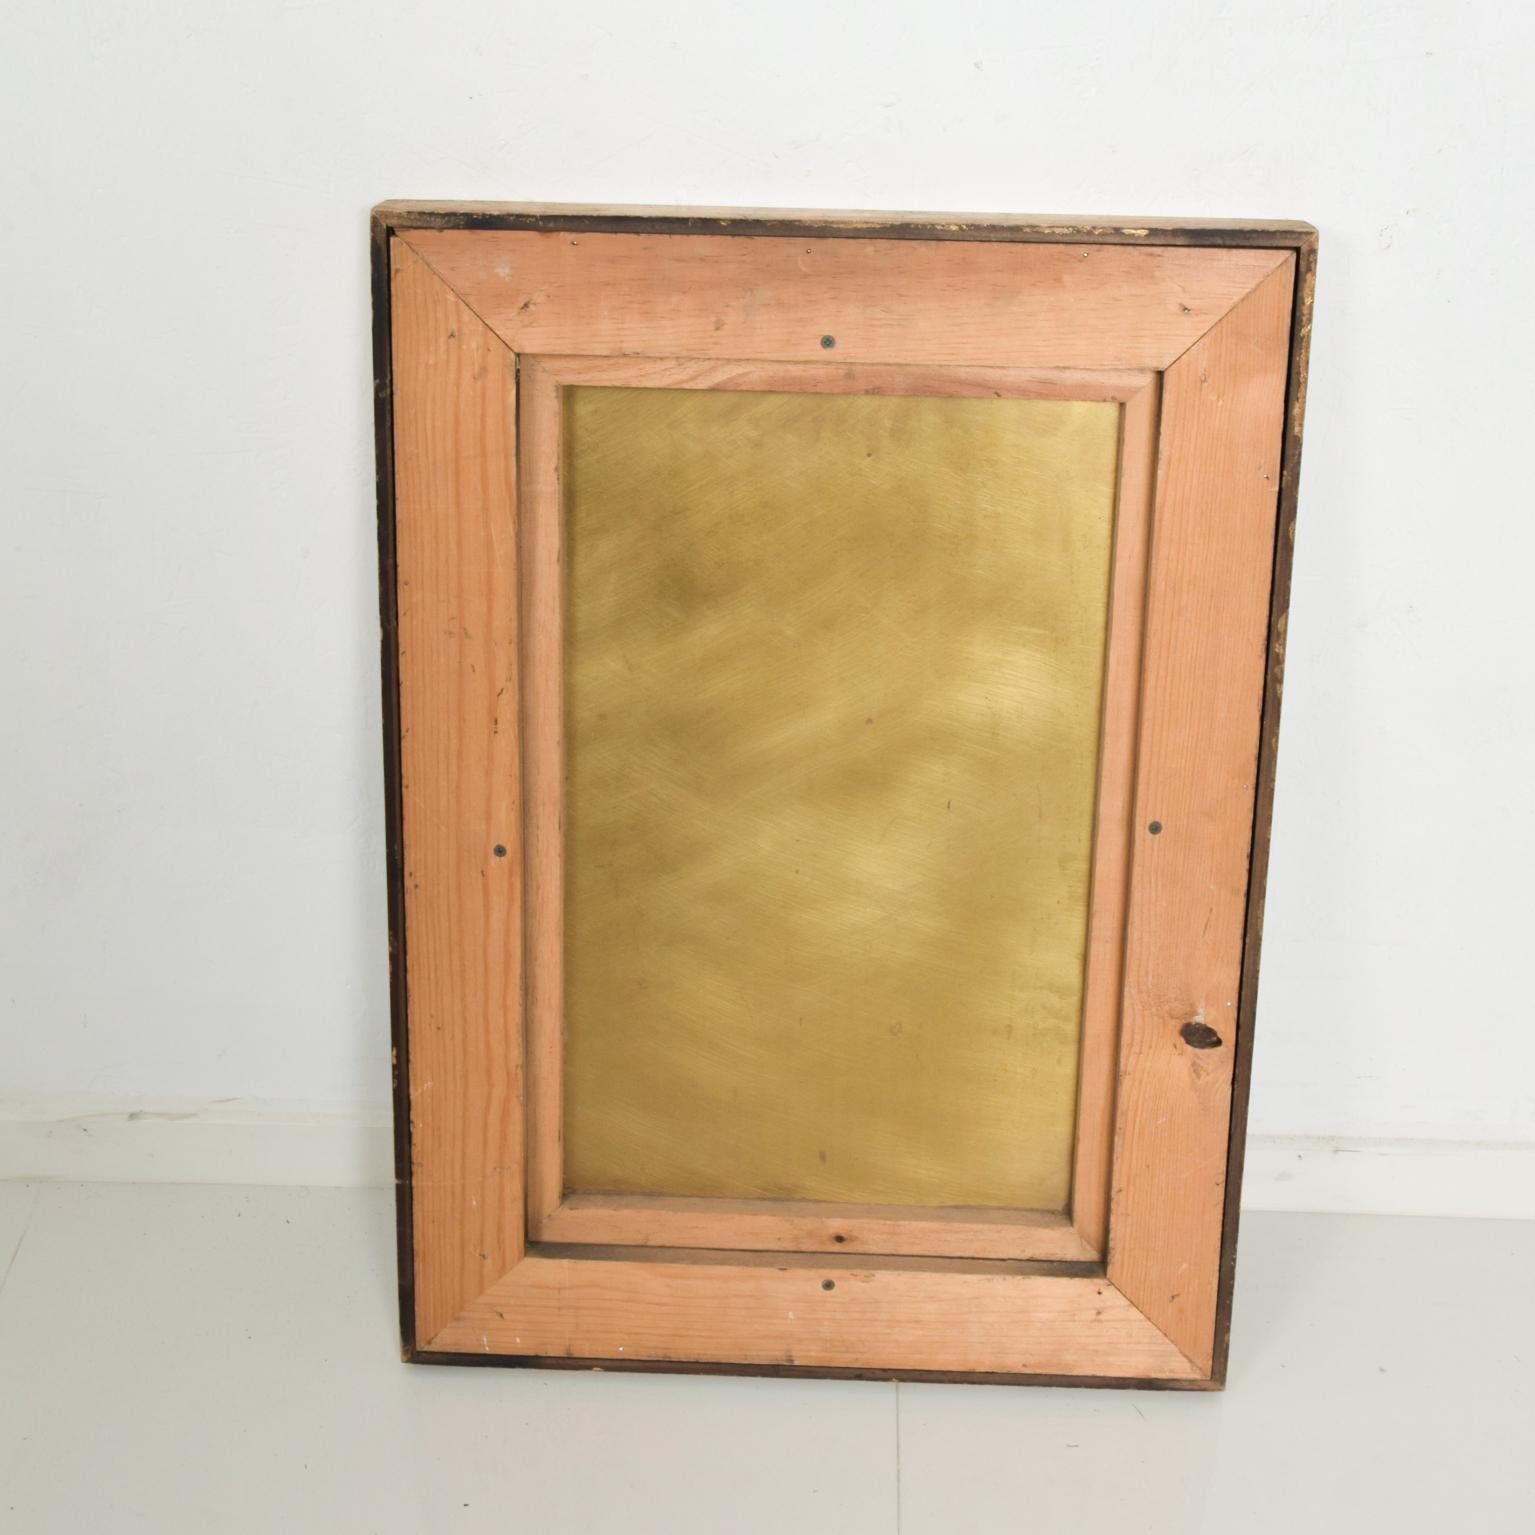 Art Abstract painting composed in patinated brass by Raul Monje Mexico
26.38 w x 32.5 h x 1.5 deep
Wood gilt frame.
Original vintage unrestored condition. Expect signs of vintage wear. 
Scuffs, dents, patina present. 
Refer to images provided.